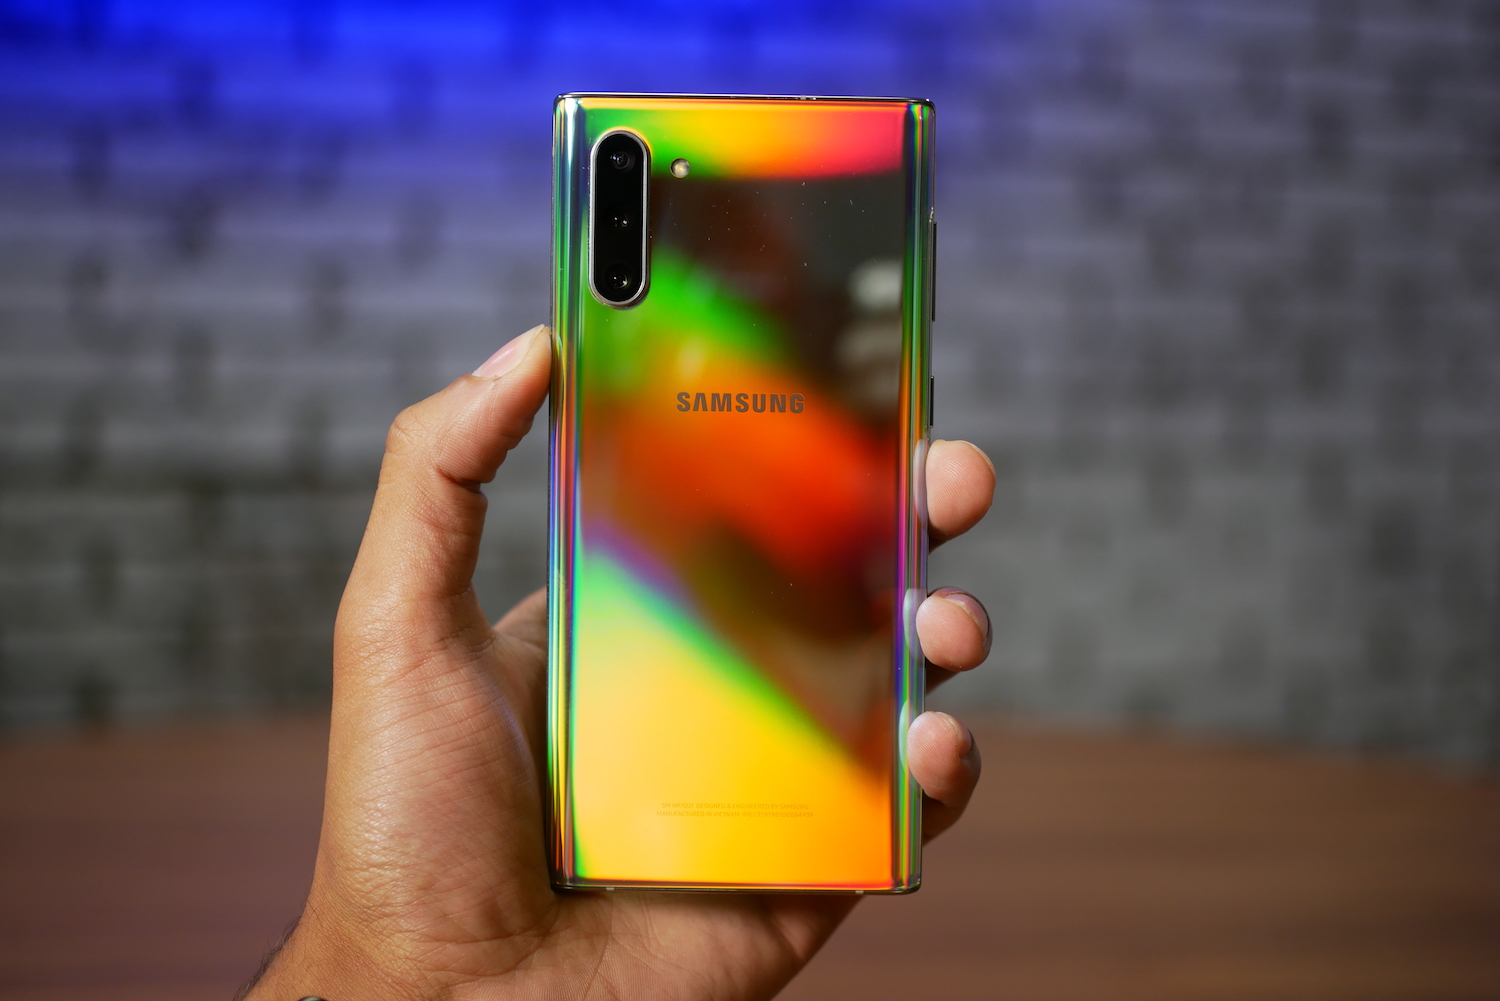 Samsung Galaxy Note 10 Lite review: Making the S Pen experience affordable